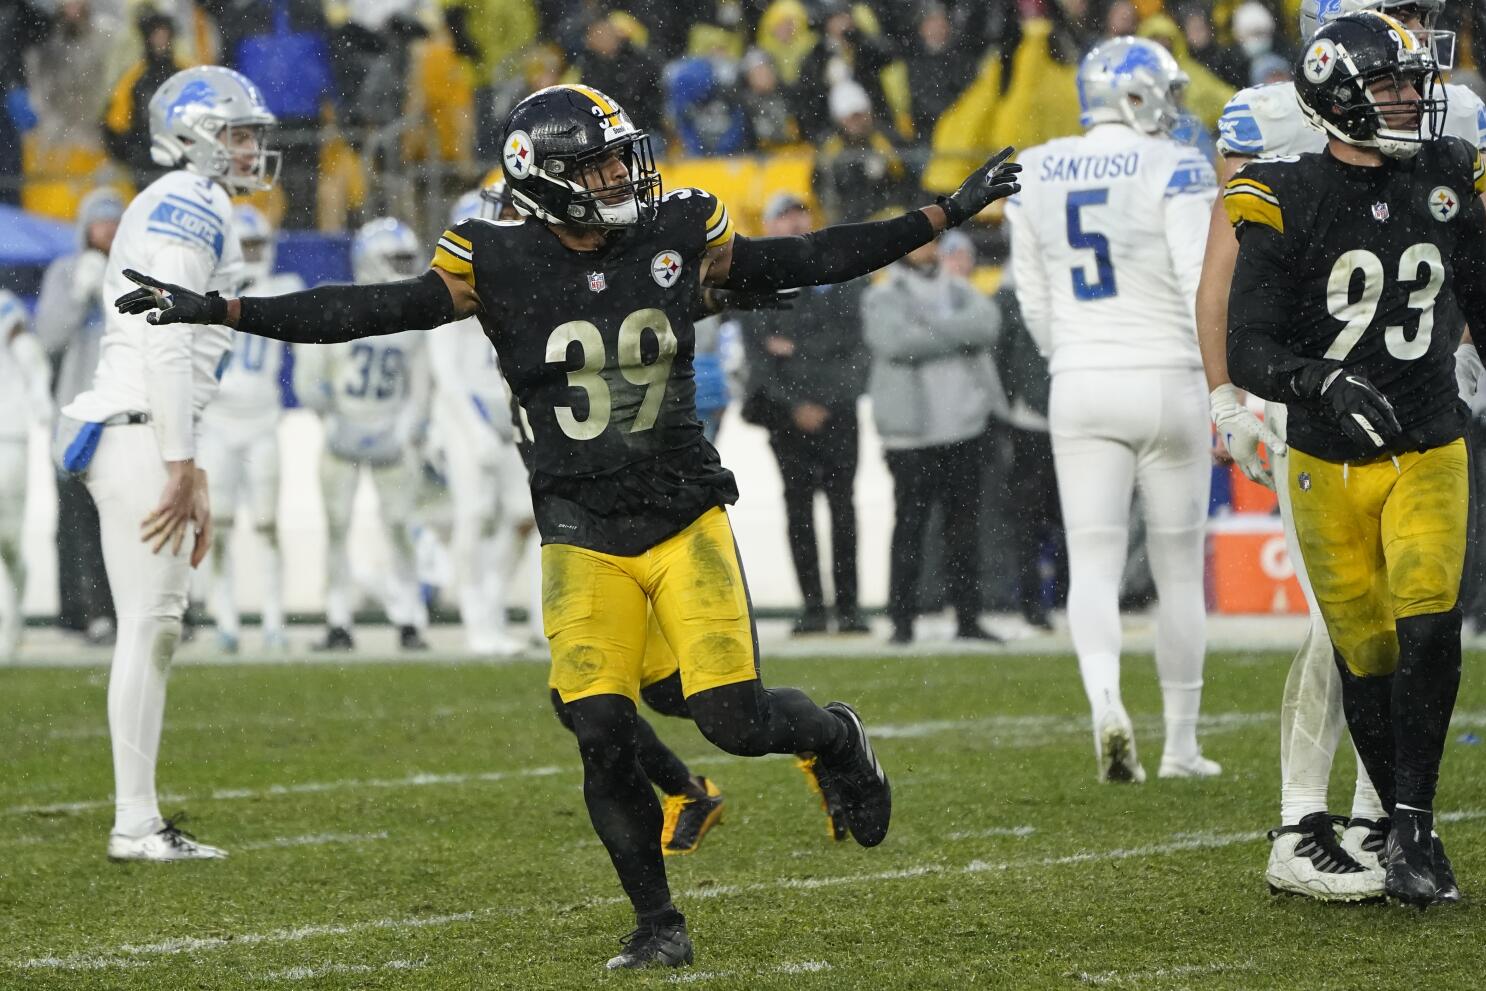 Comedy of errors as Steelers, Lions slog to 16-16 tie - The San